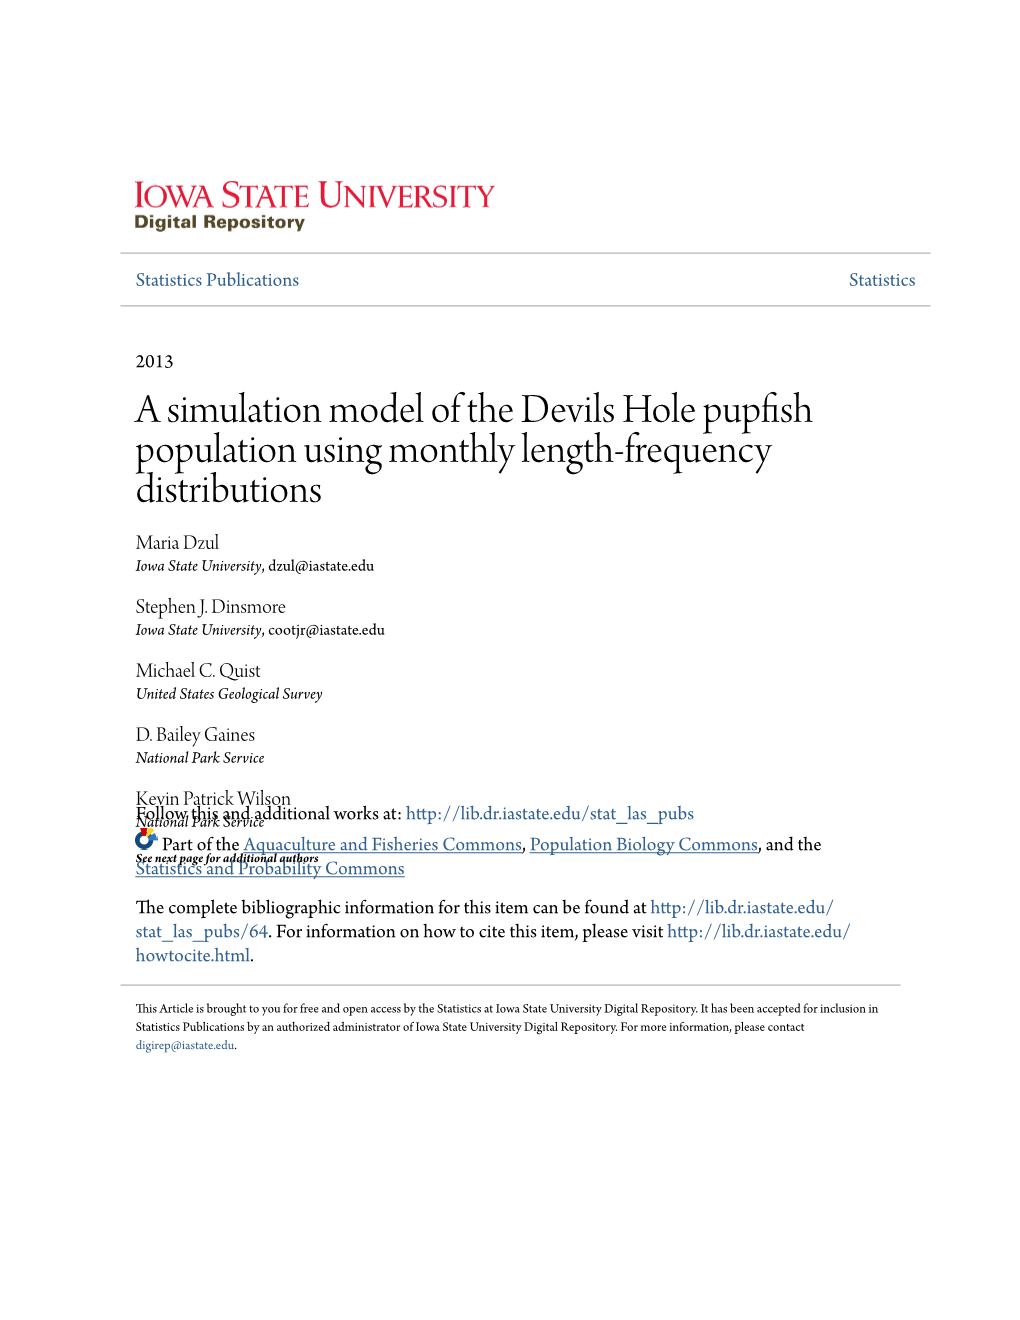 A Simulation Model of the Devils Hole Pupfish Population Using Monthly Length-Frequency Distributions Maria Dzul Iowa State University, Dzul@Iastate.Edu